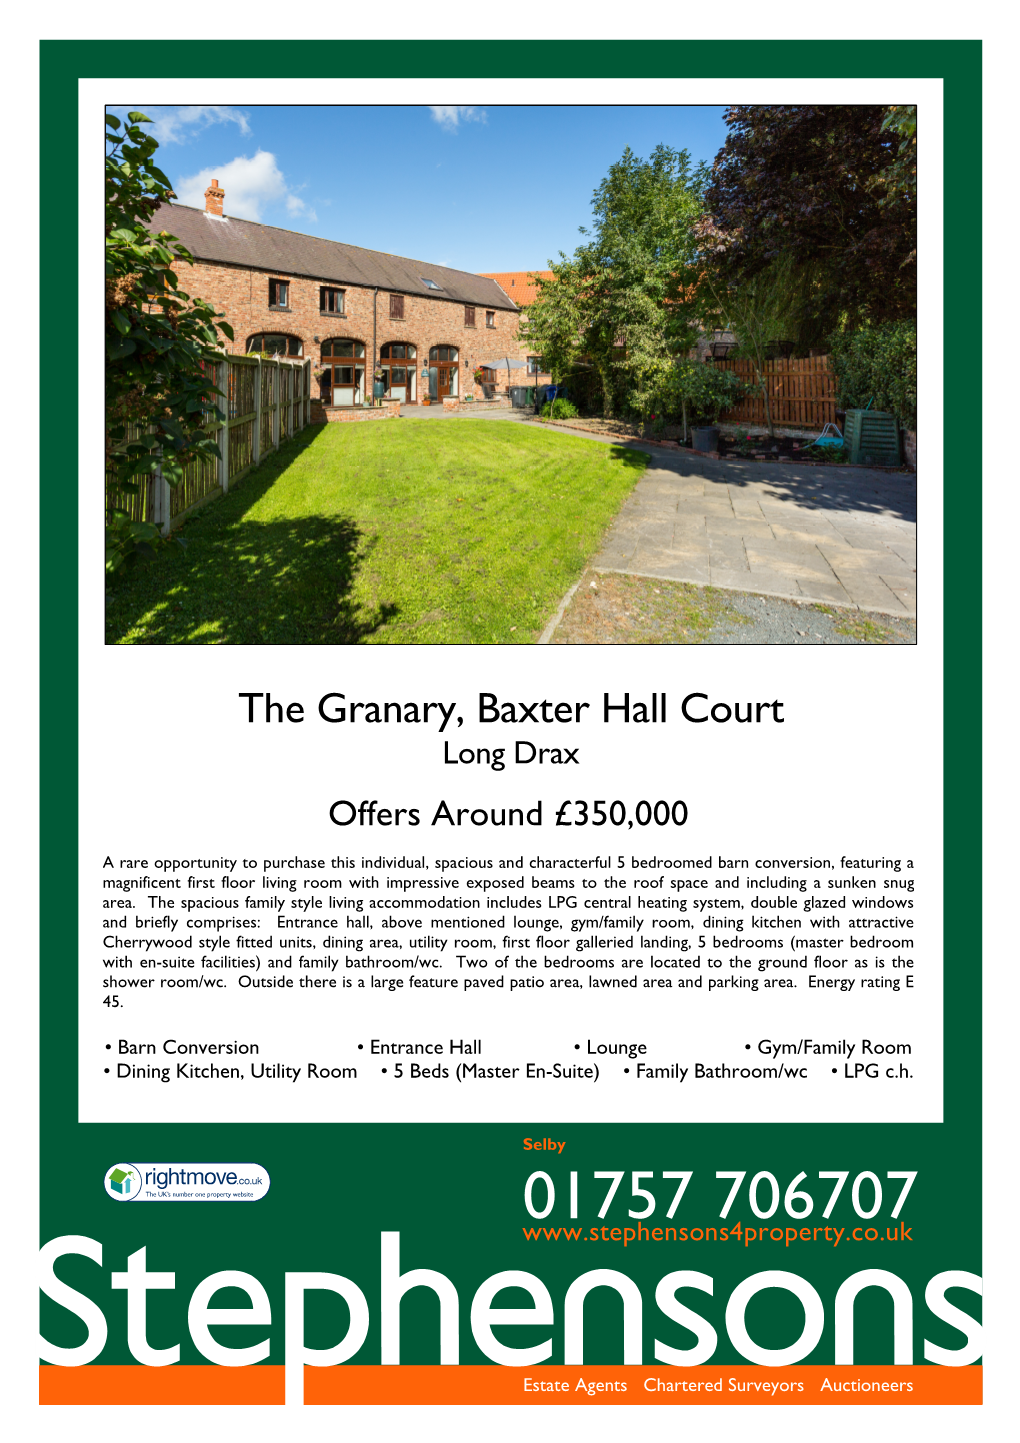 The Granary, Baxter Hall Court Long Drax Offers Around £350,000